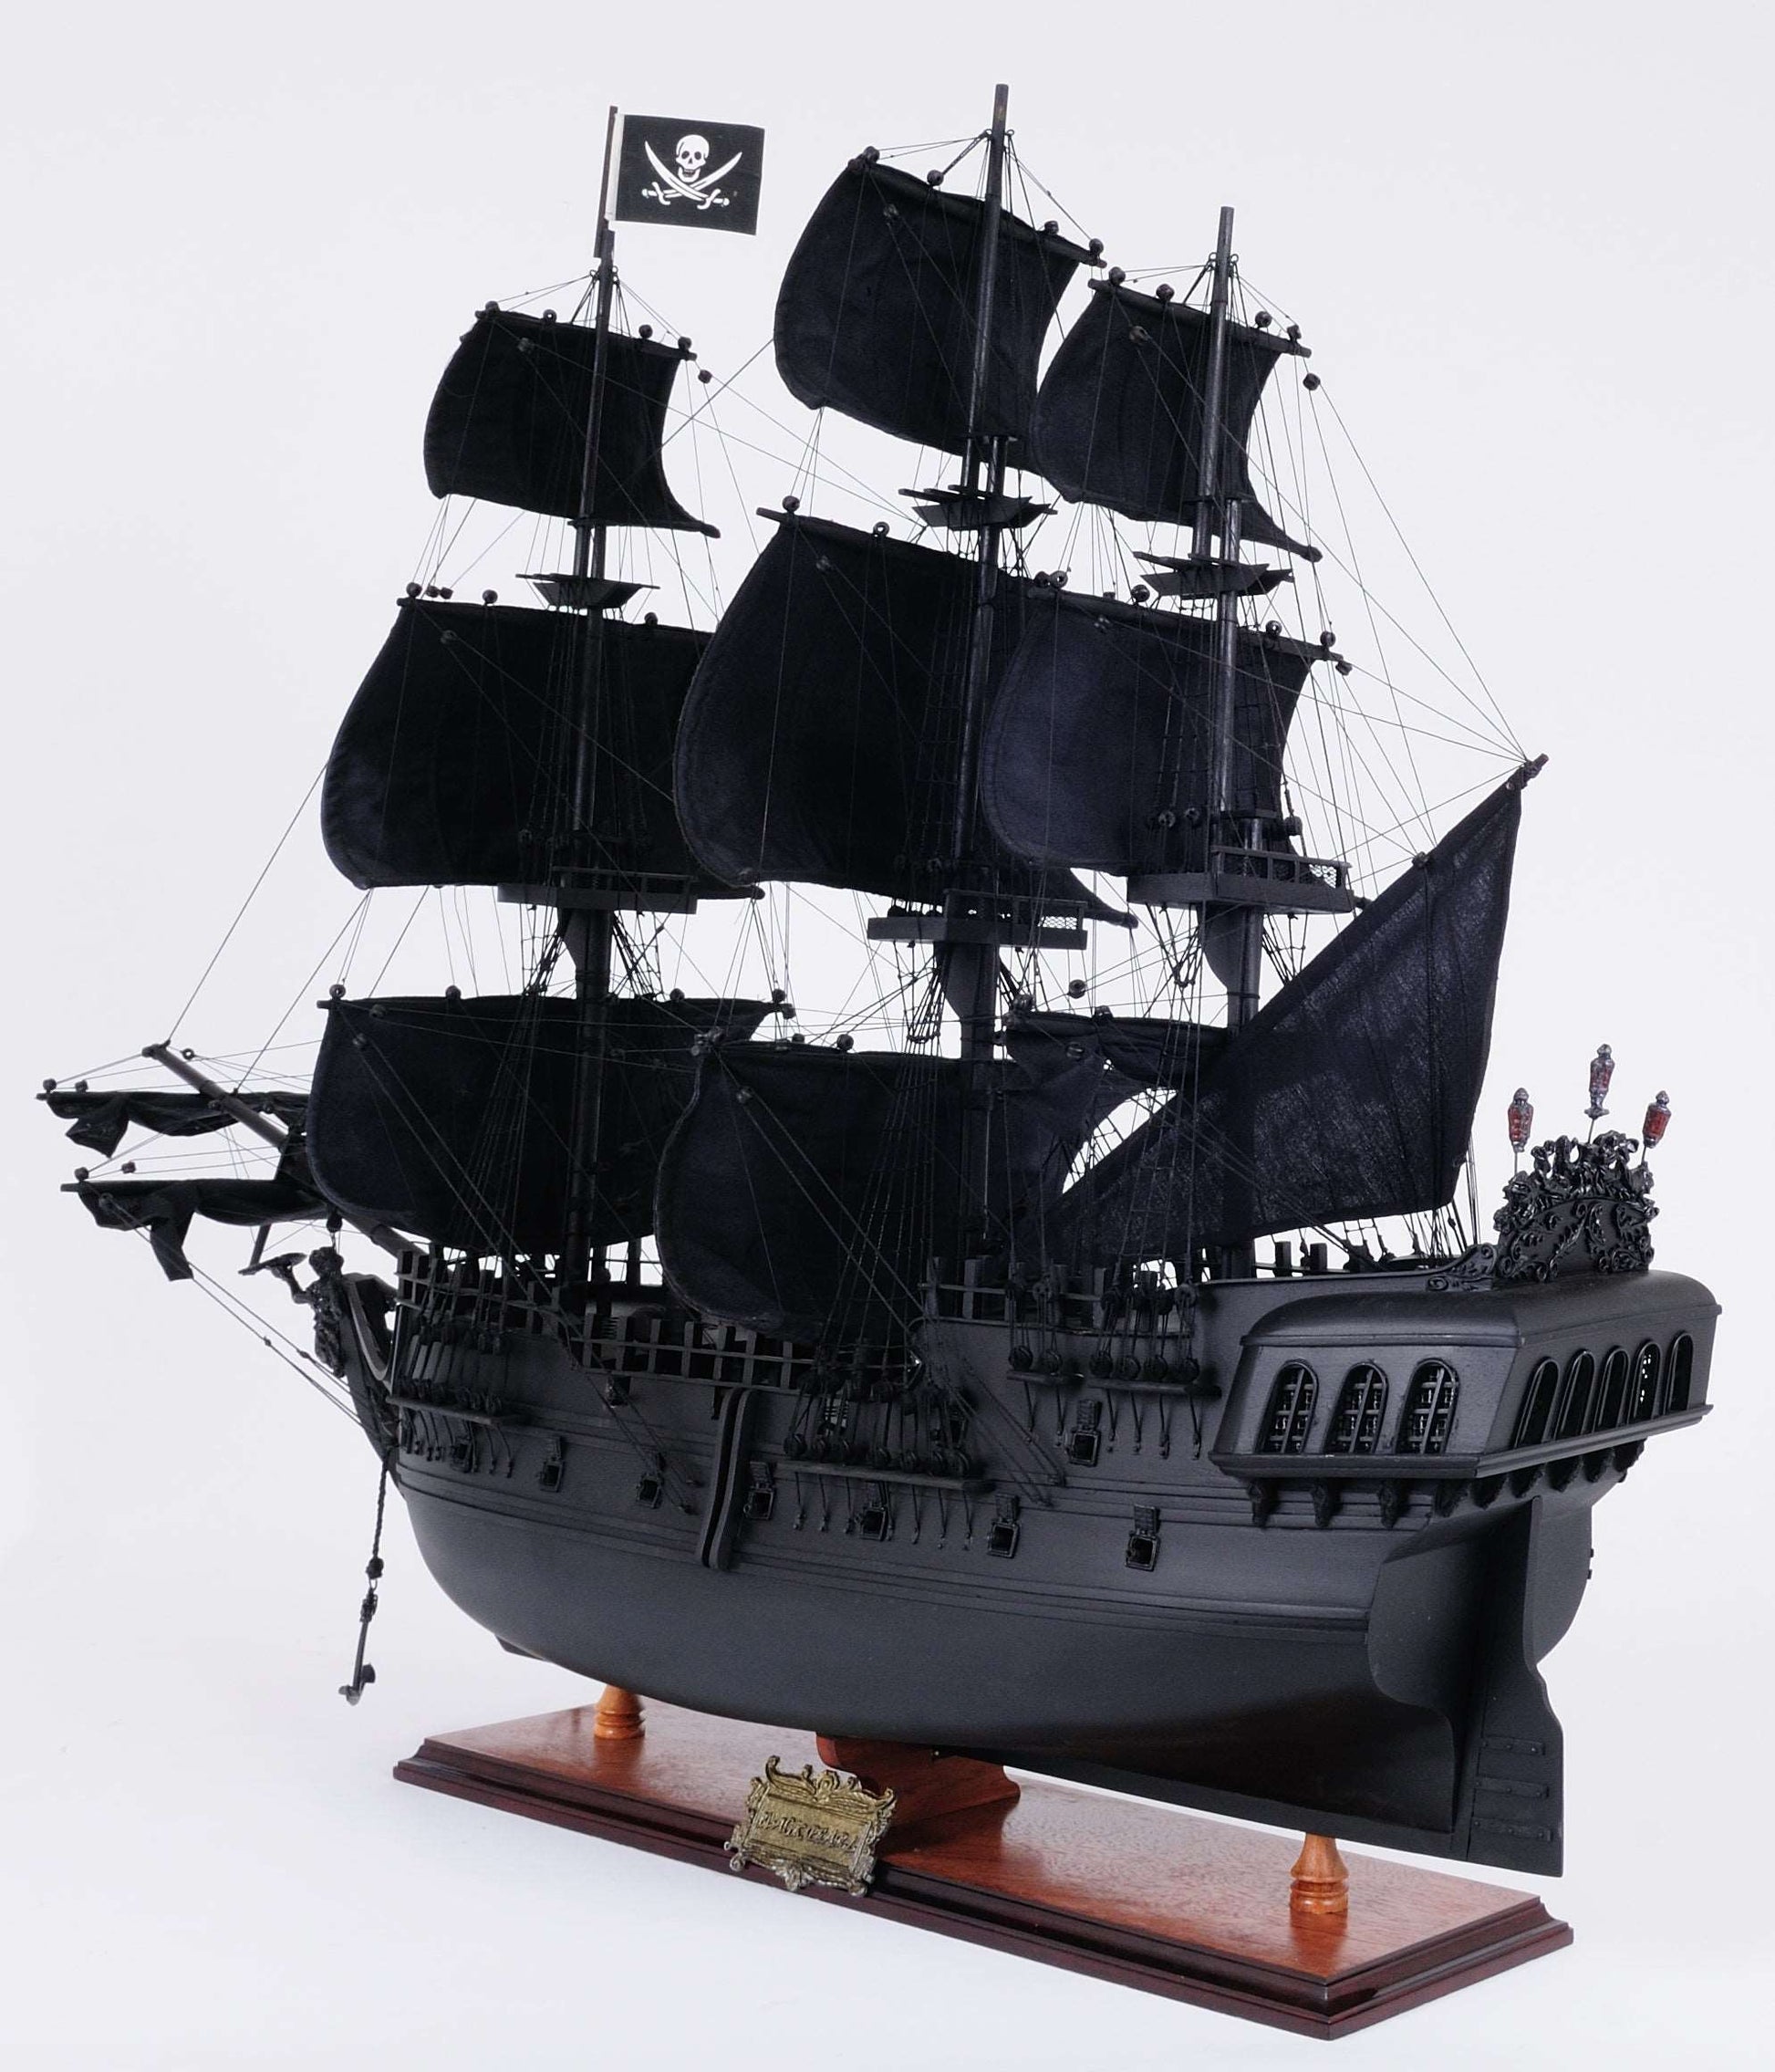 ALDO Hobbies & Creative Arts> Collectibles> Scale Model L: 40 W: 13.75 H: 39.25 Inches / NEW / Wood Black Pearl Pirates of The Caribbean Medium Tall Ship Wood Model Sailboat With Table Top Display Case Assembled